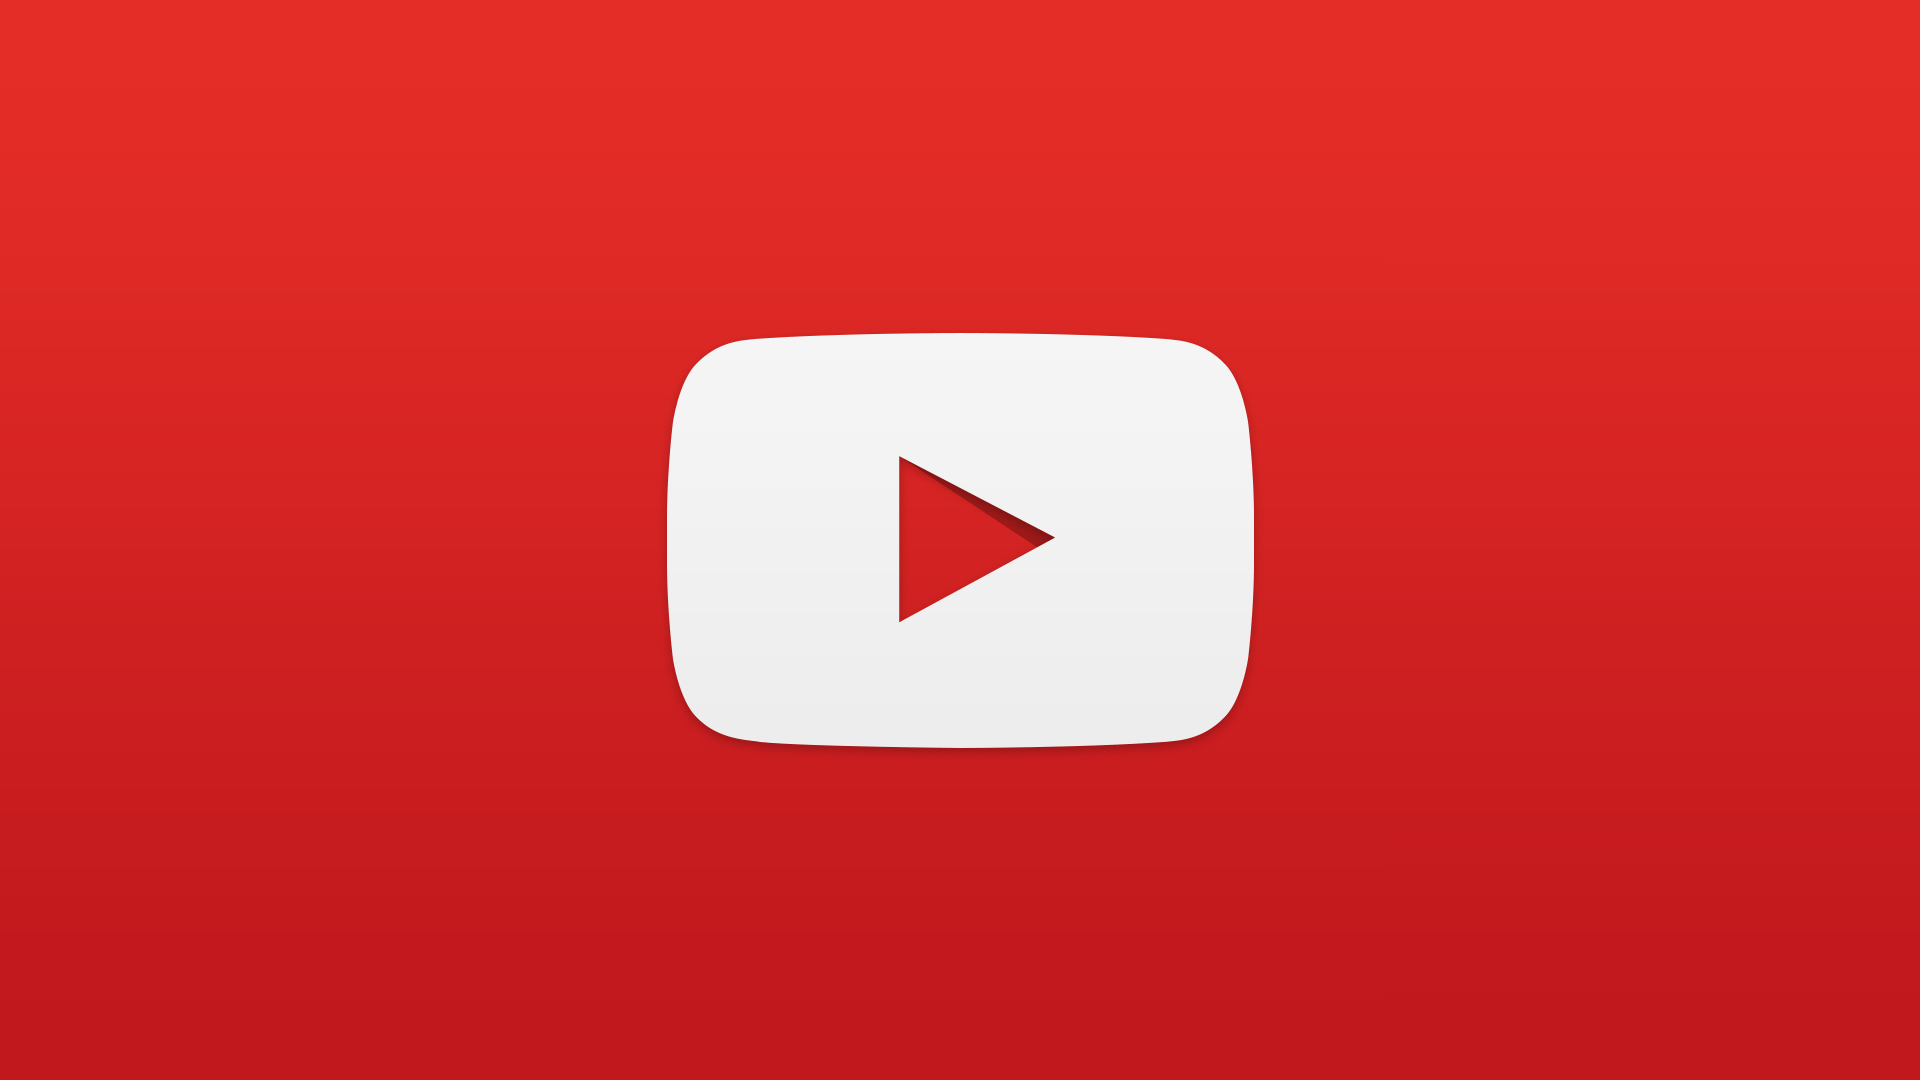 Youtube Wallpapers Top Free Youtube Backgrounds Wallpaperaccess